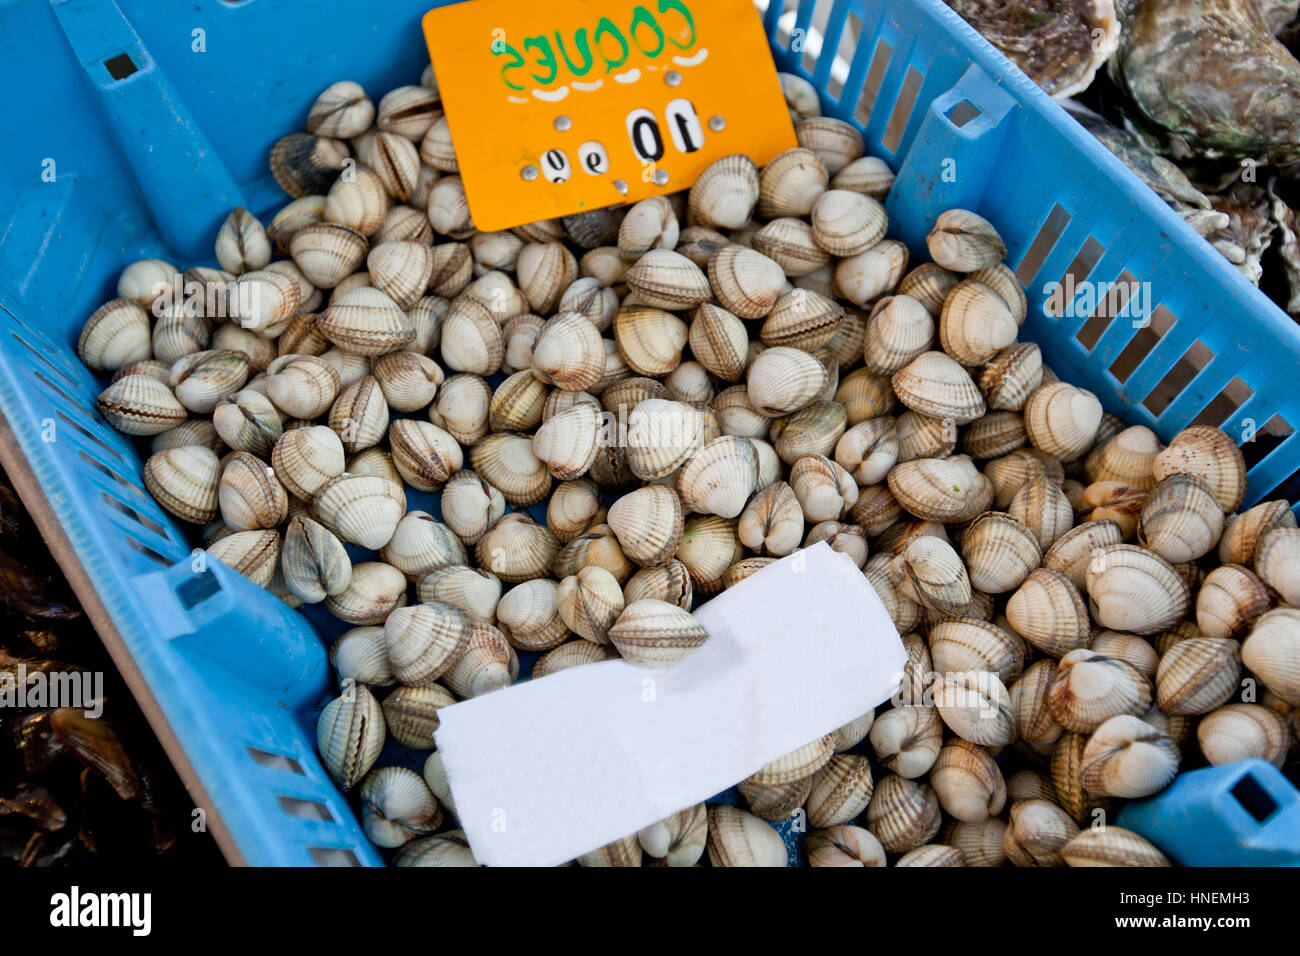 Close-up of shellfish in container at store Stock Photo